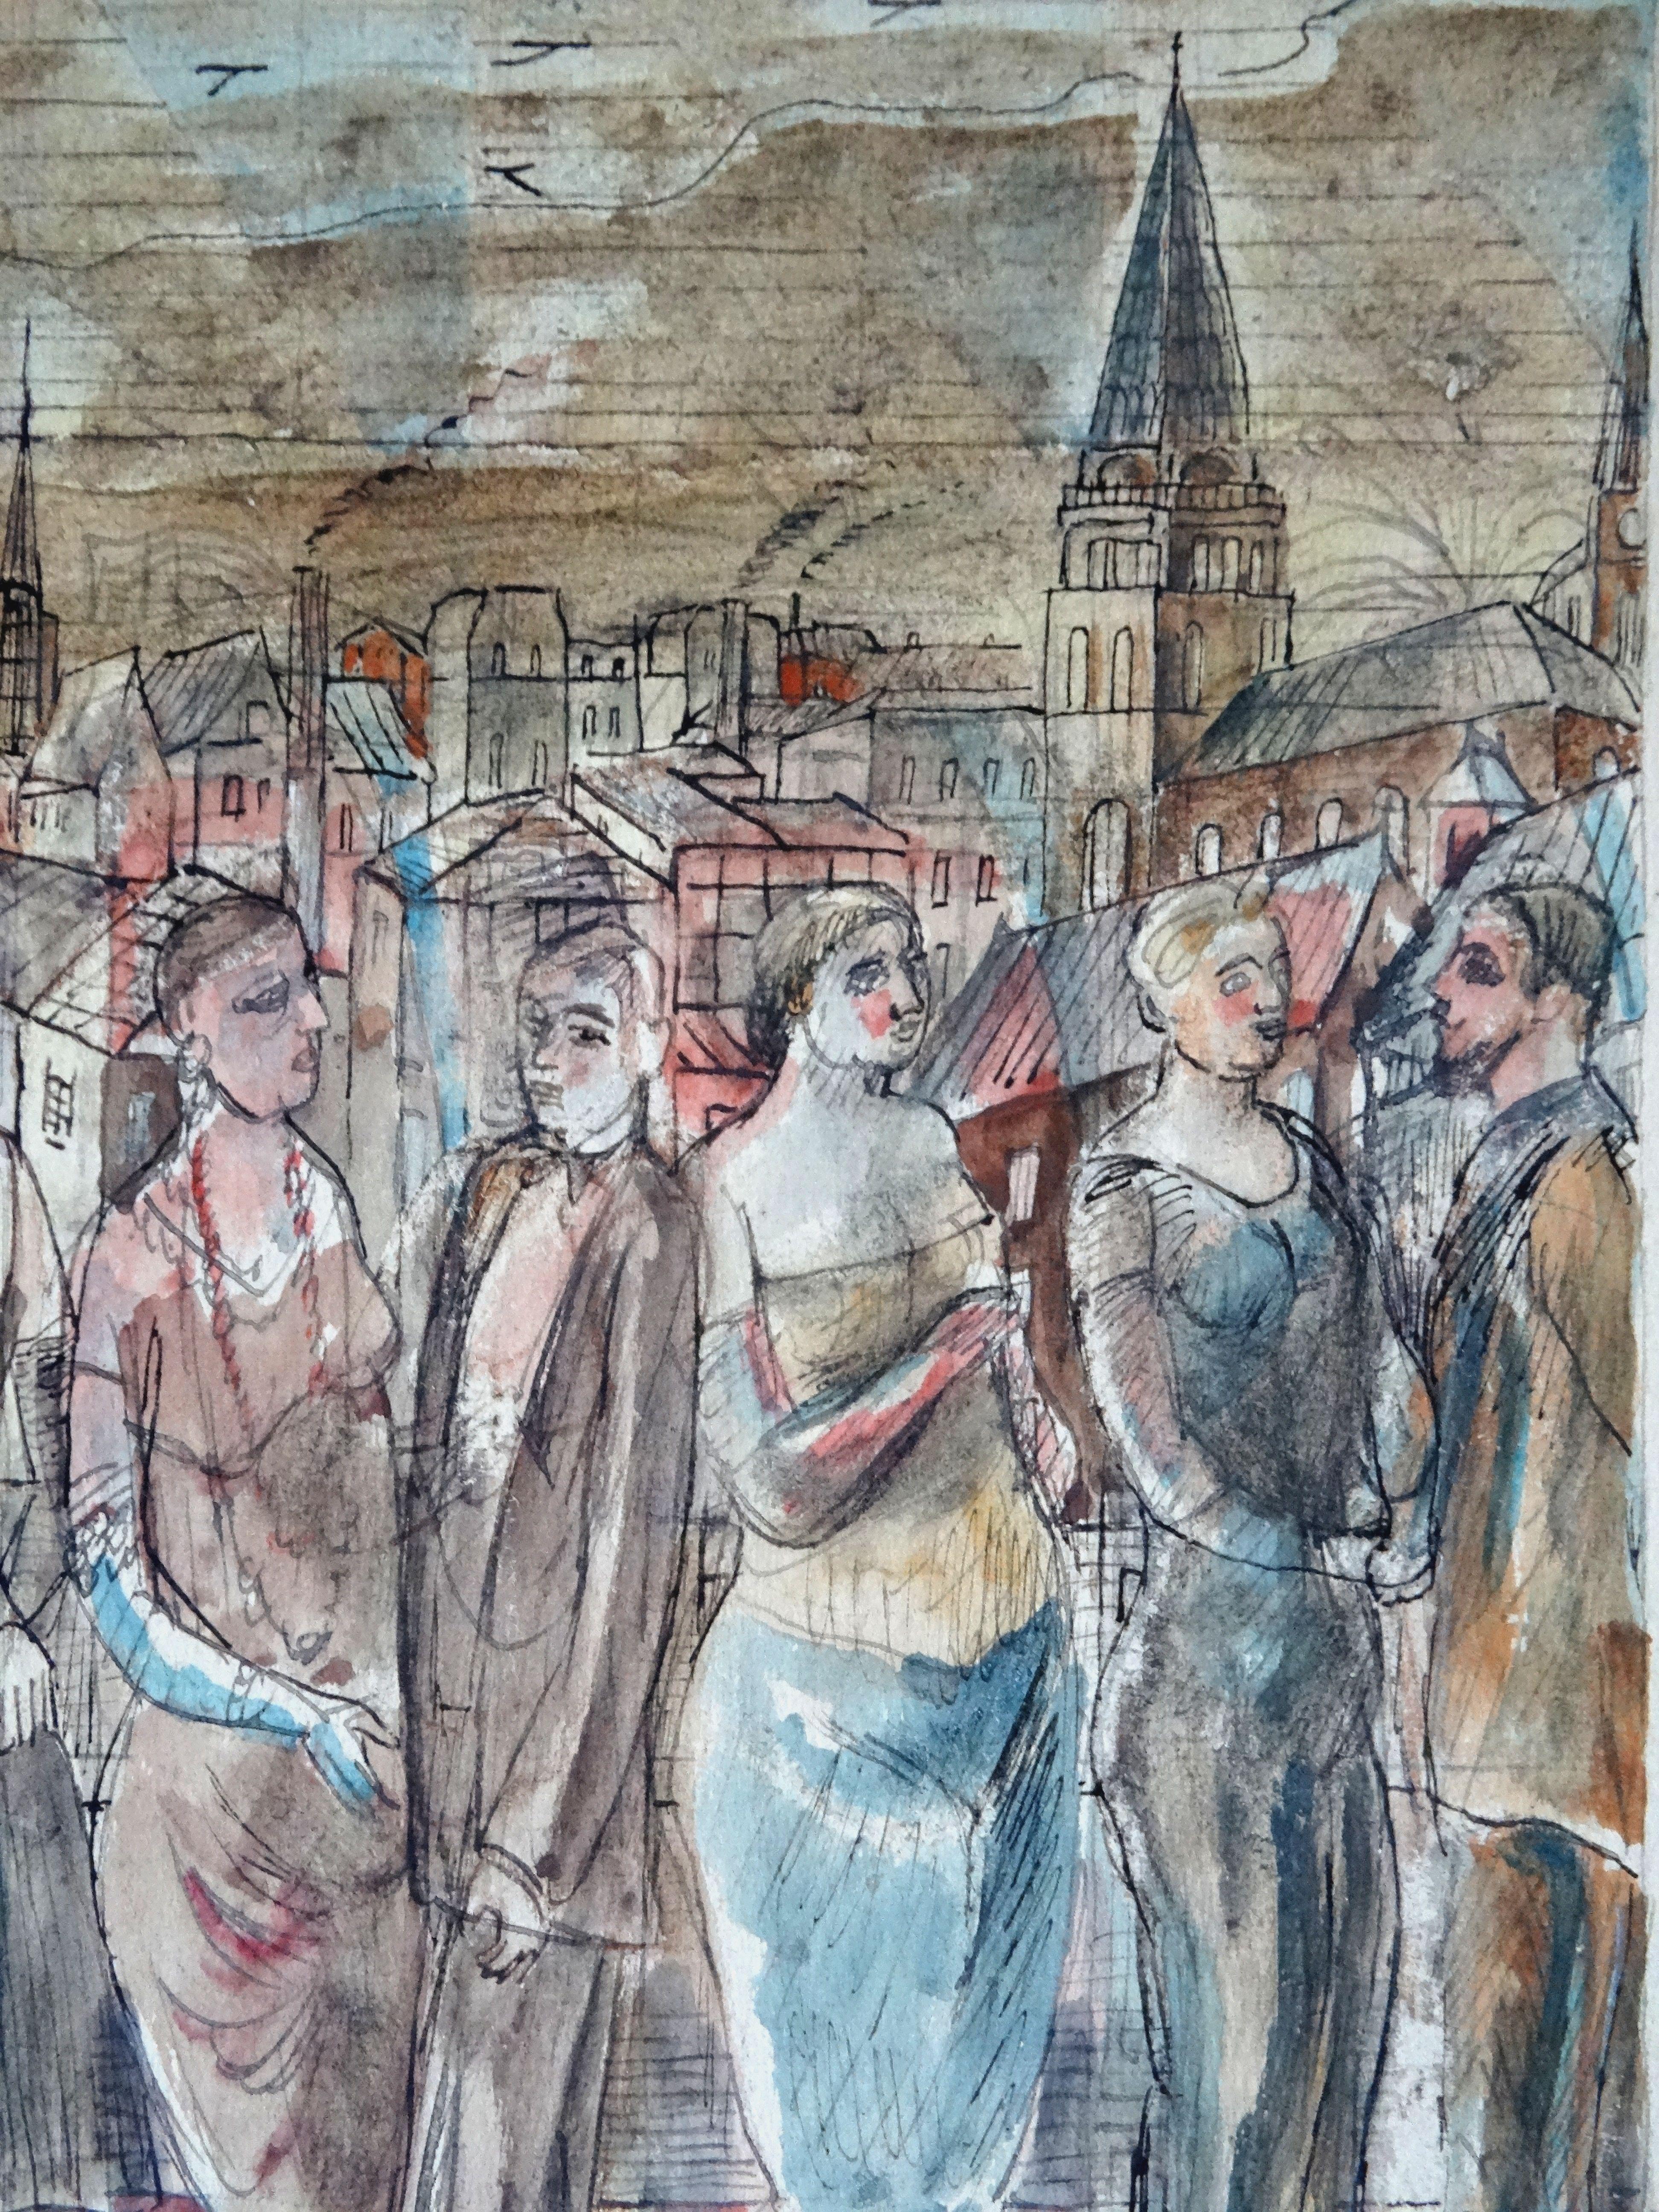 Overflight over the city. 1947, paper, mixed media, 23x20 cm - Gray Figurative Painting by Adolfs Zardins